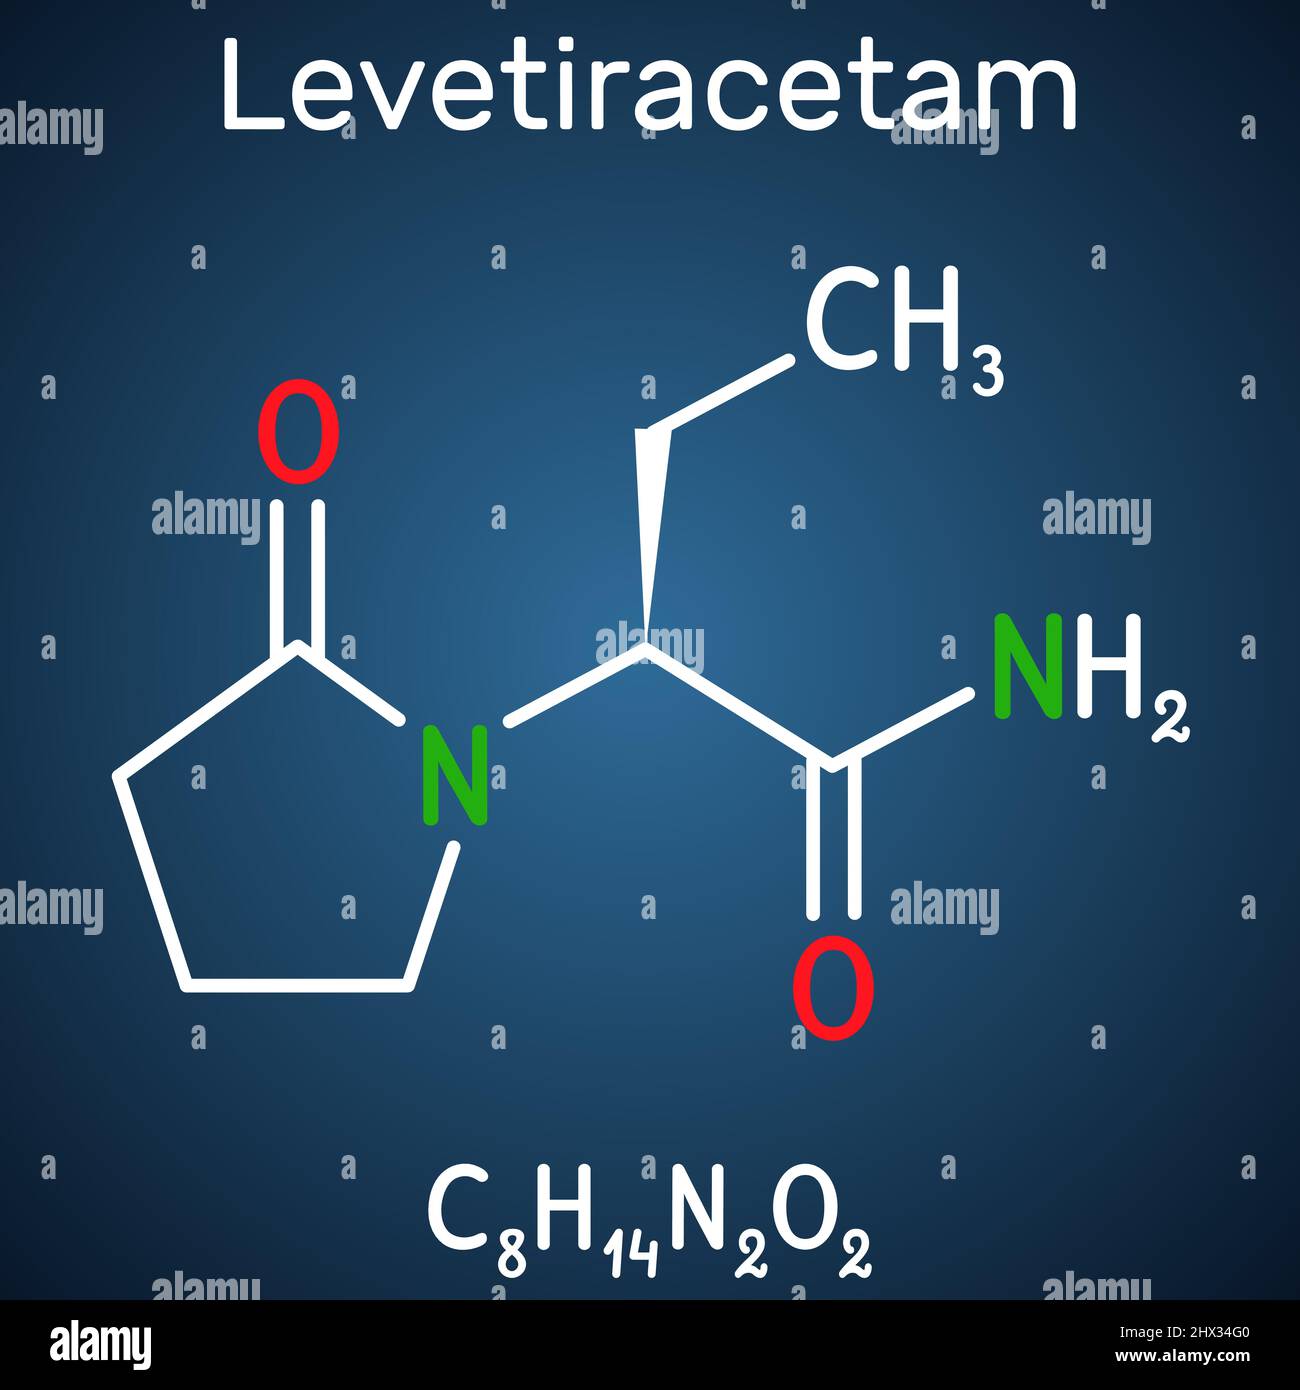 Levetiracetam molecule. It is pyrrolidine, anticonvulsant medication used to treat epilepsy. Structural chemical formula on the dark blue background. Stock Vector